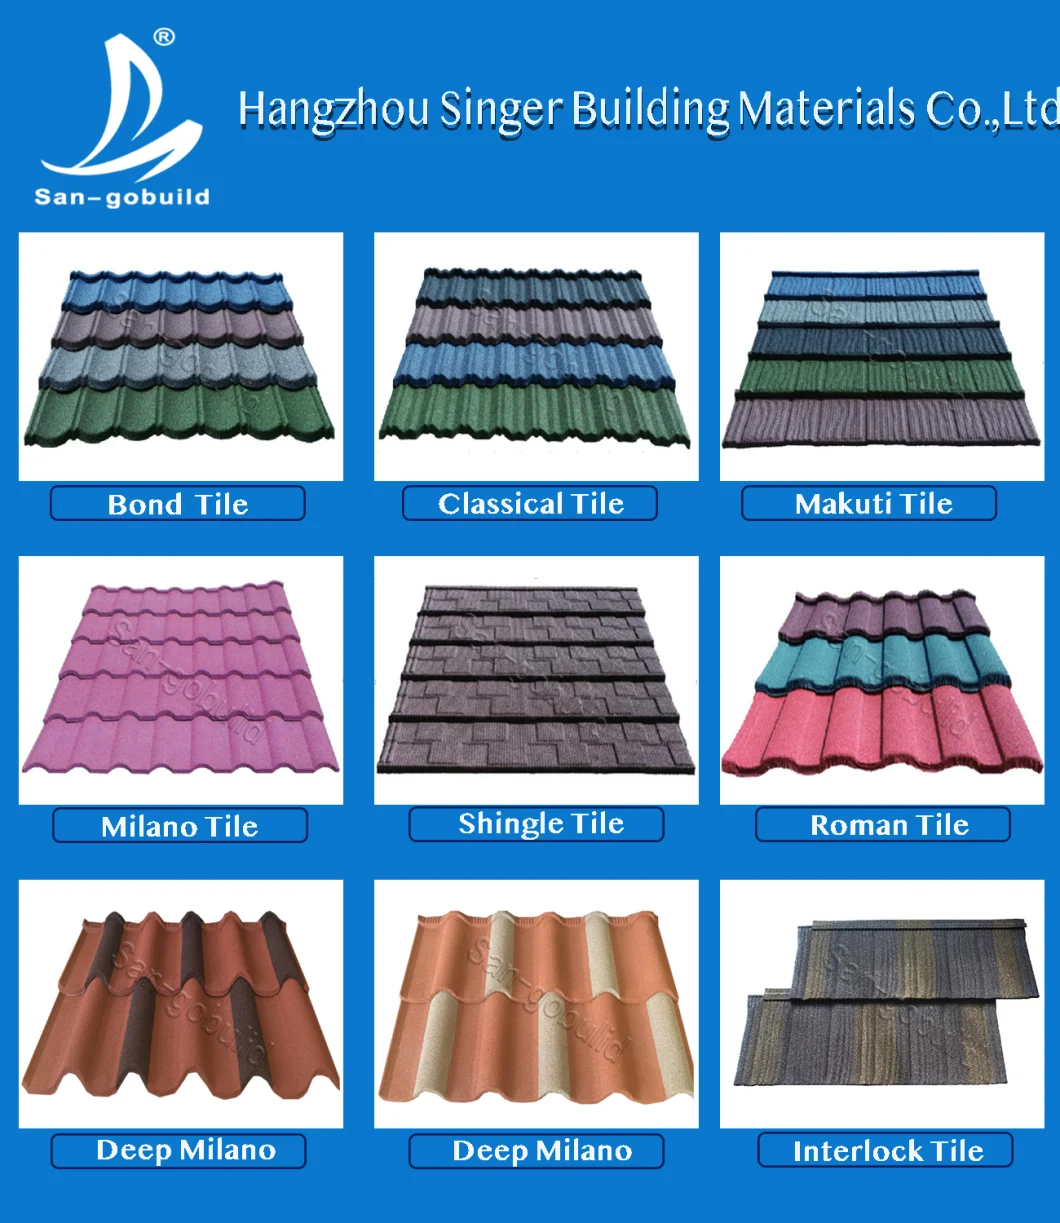 Construction Brick Roofing Tiles, Color Stone Chips Long Span Galvanized Aluminium Roofing Sheet Philippines